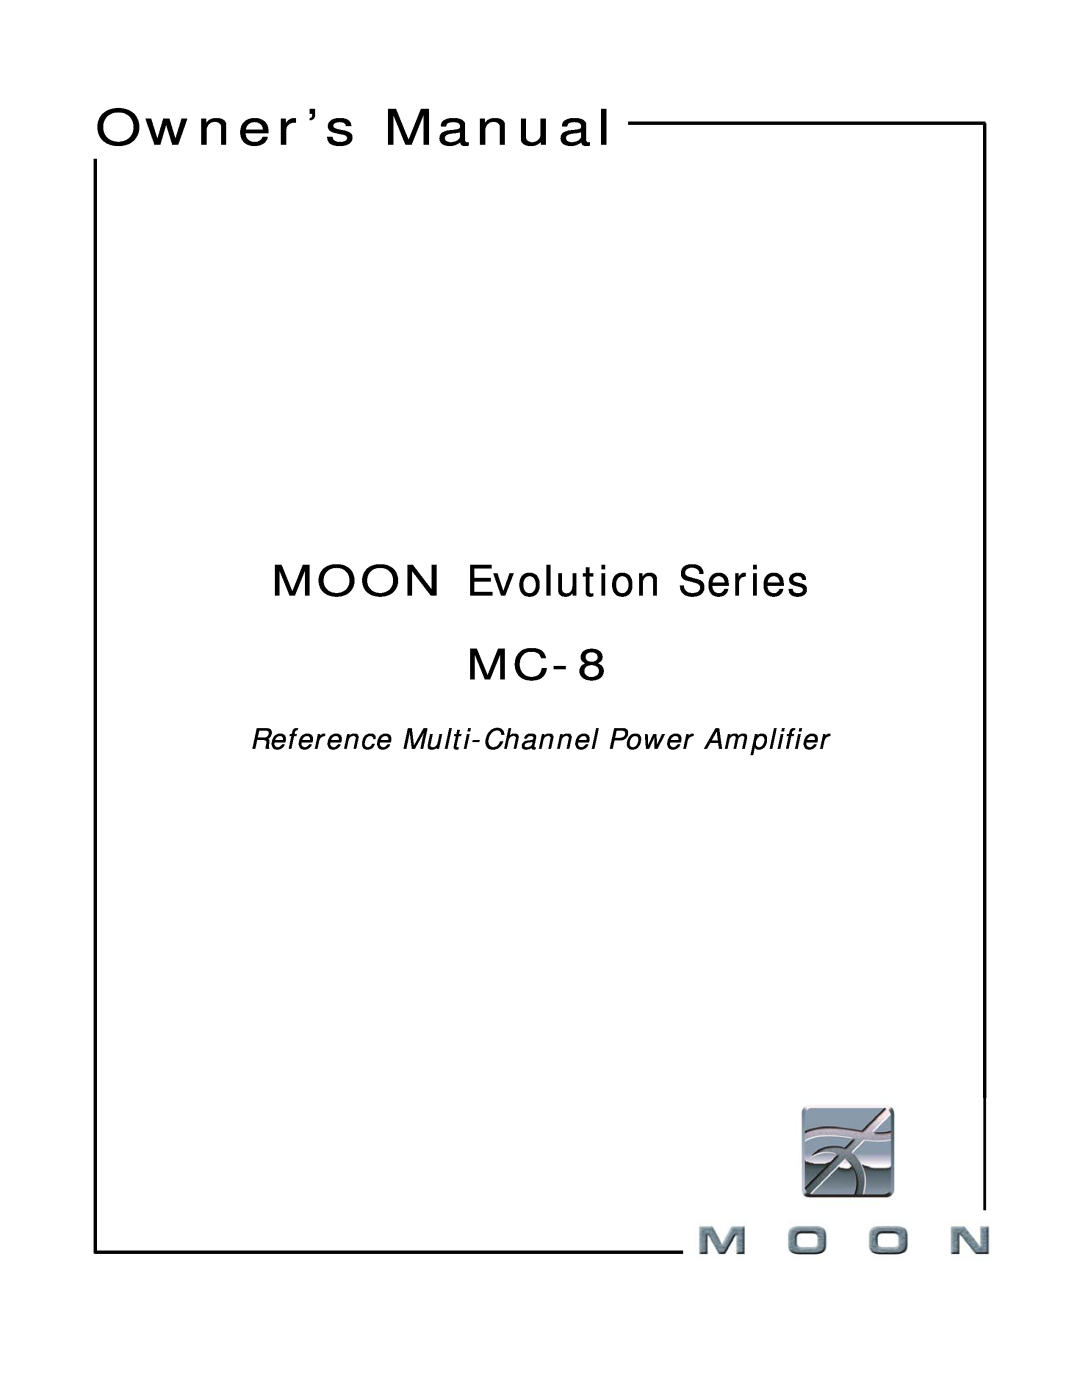 Simaudio owner manual MOON Evolution Series MC-8, Reference Multi-ChannelPower Amplifier 